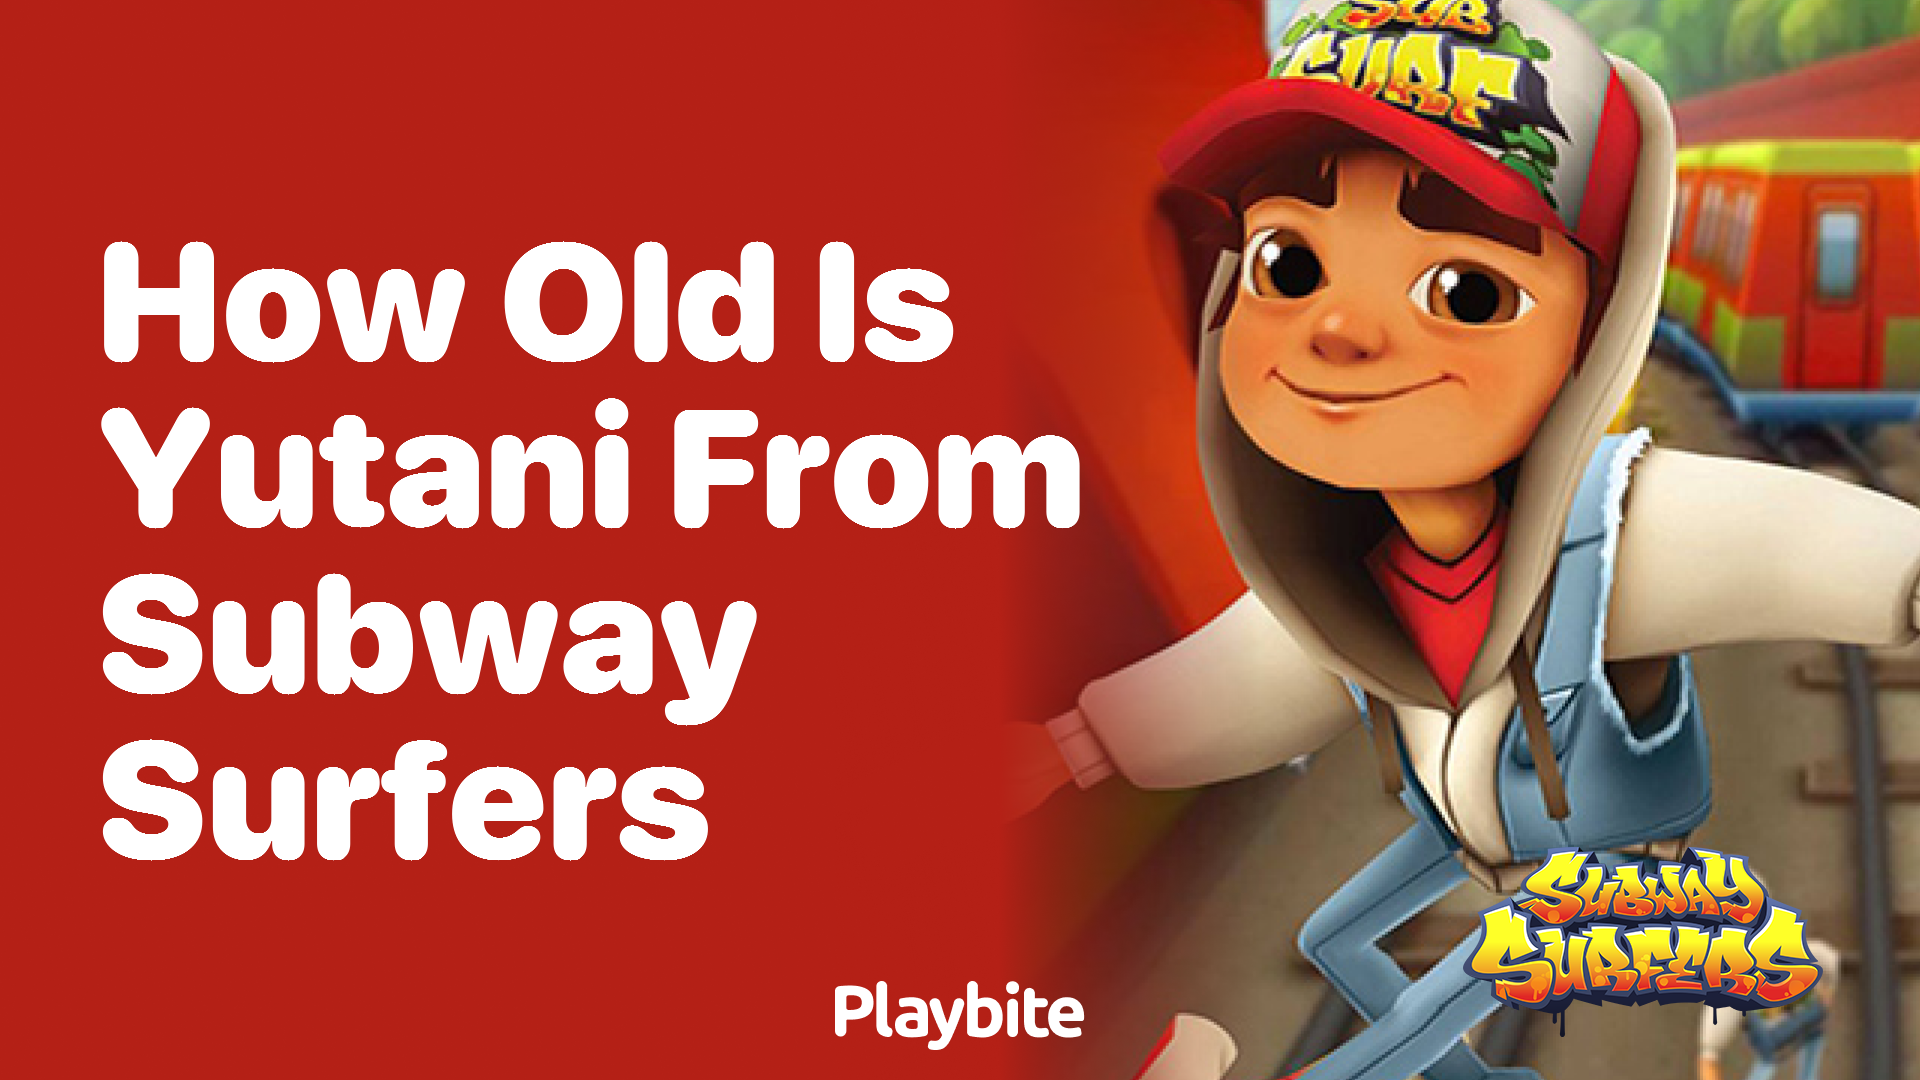 How old is Yutani from Subway Surfers?